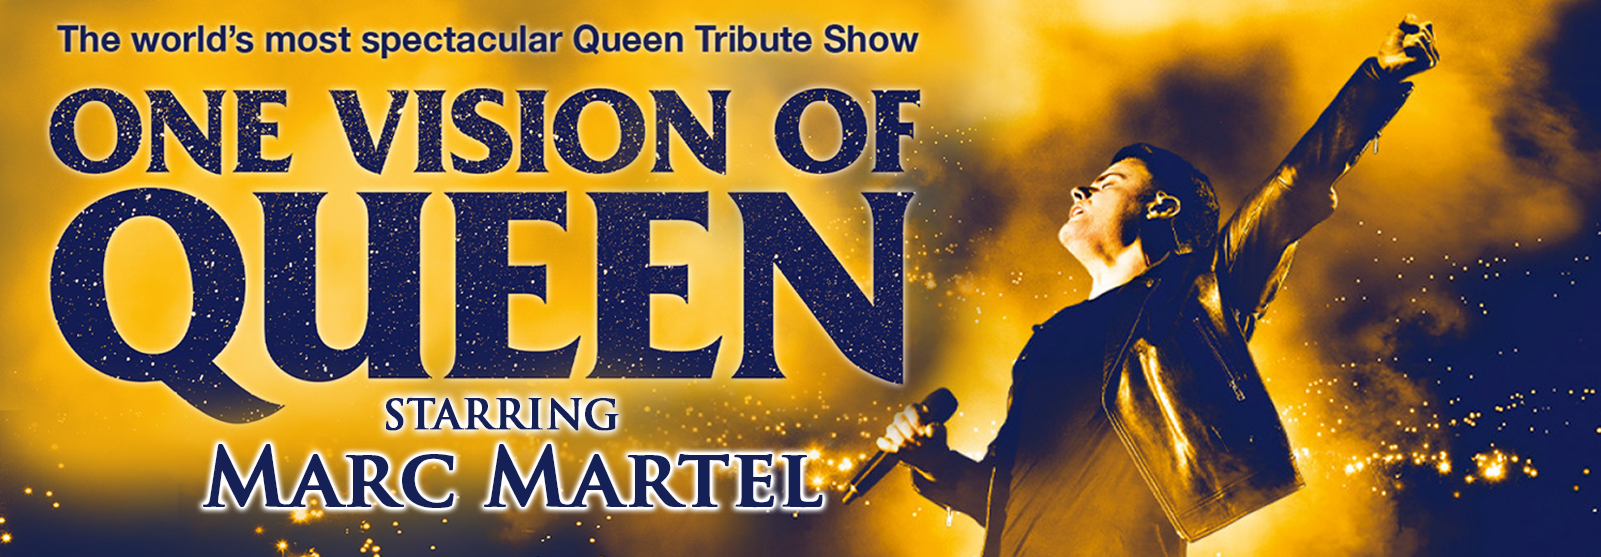 One Vision of Queen starring Marc Martel